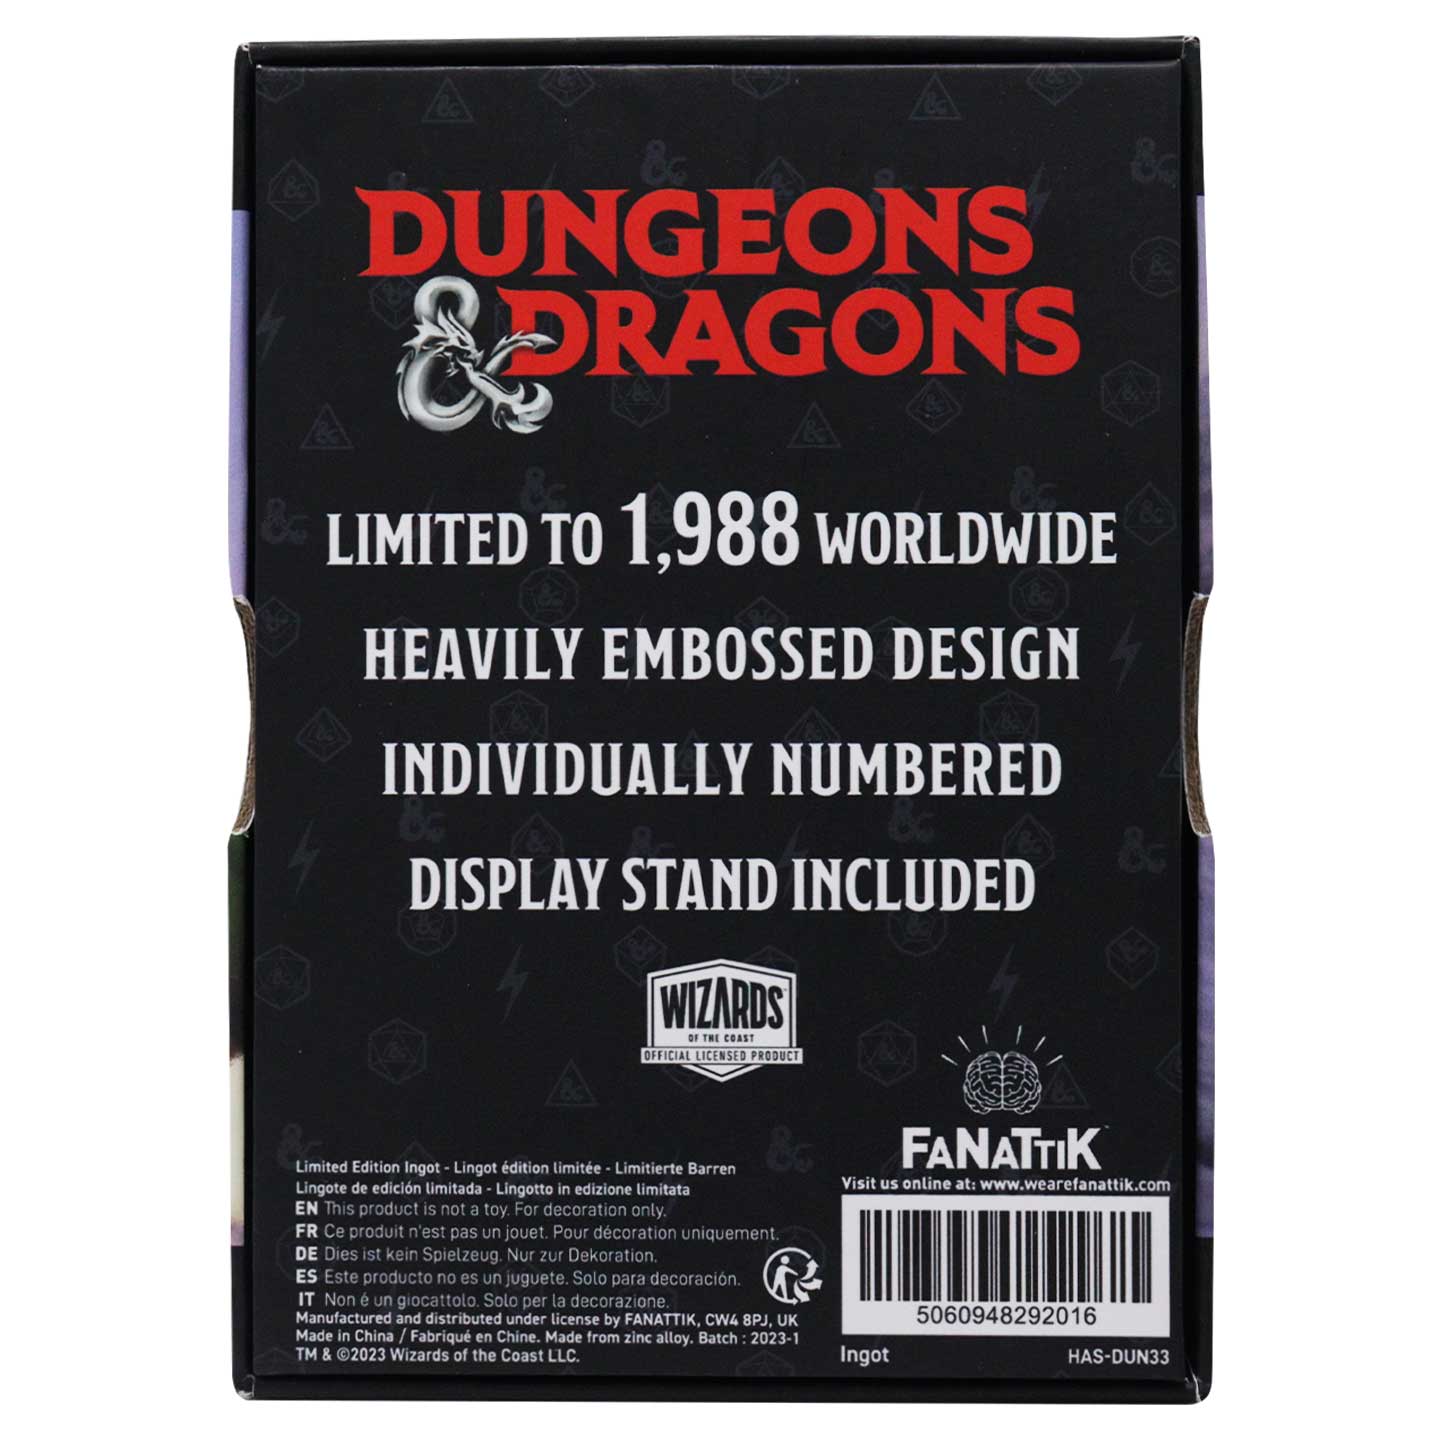 Dungeons & Dragons Limited Edition Legend of Drizzt 35th Anniversary Metal Collectible Ingot